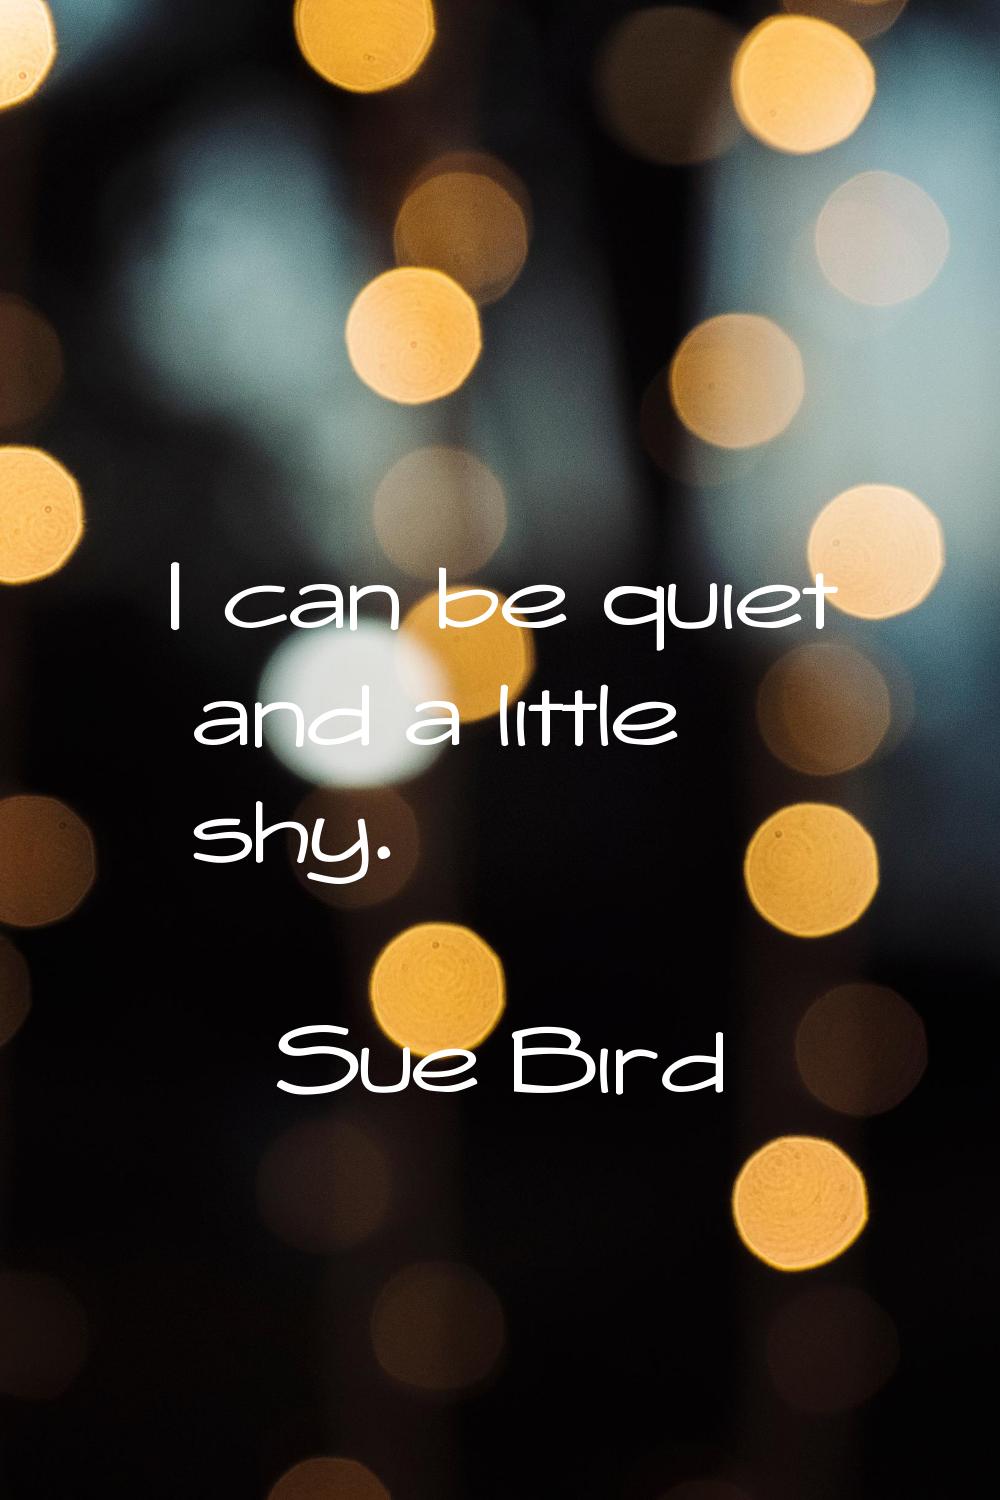 I can be quiet and a little shy.